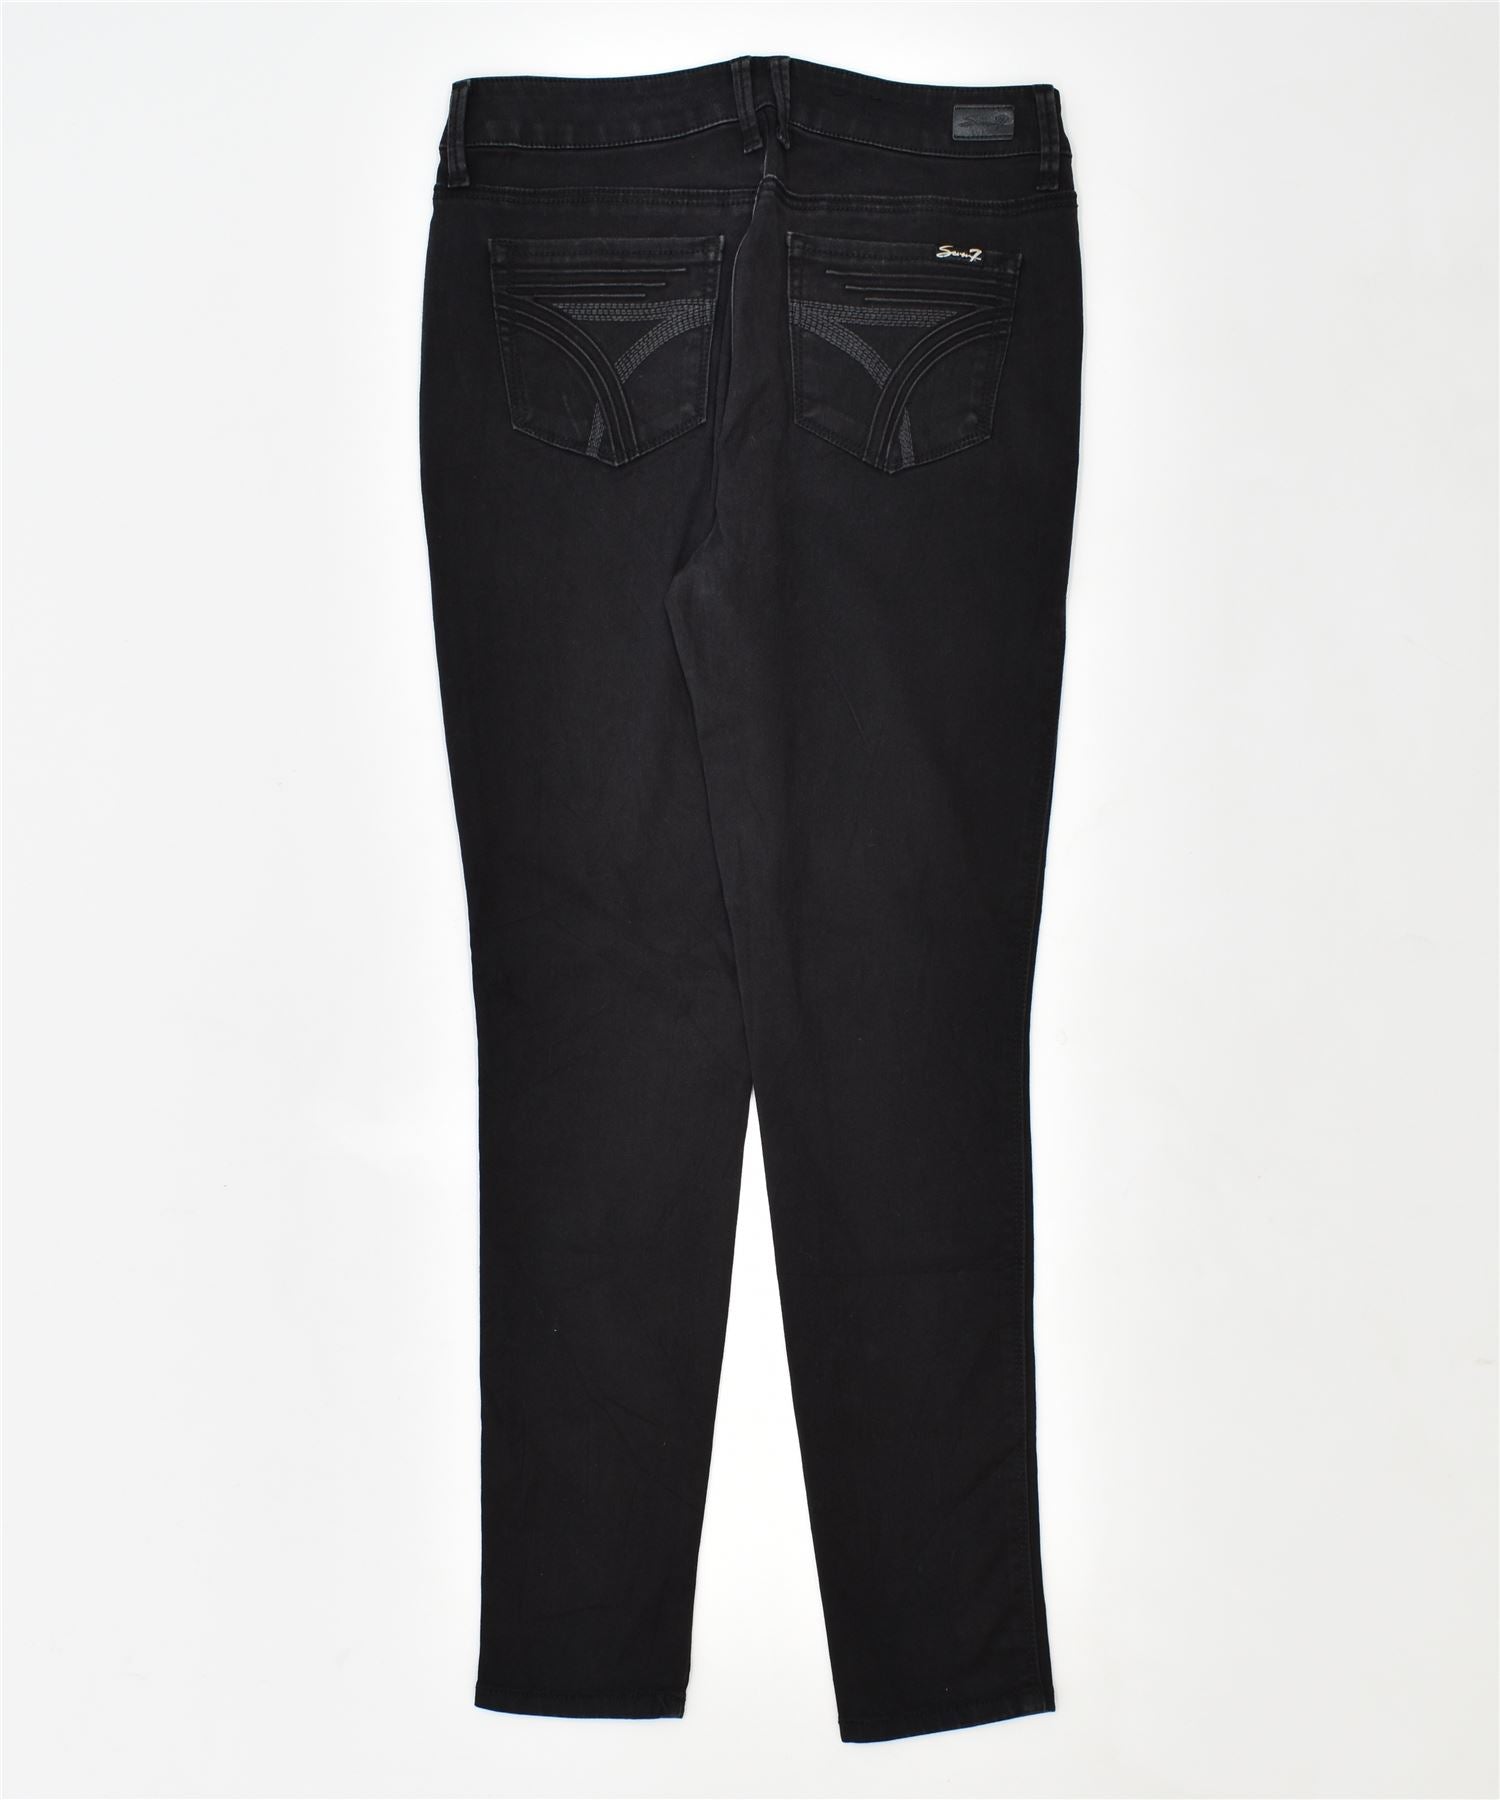 SEVEN7 Womens High Rise Skinny Casual Trousers US 10 Large W32 L31